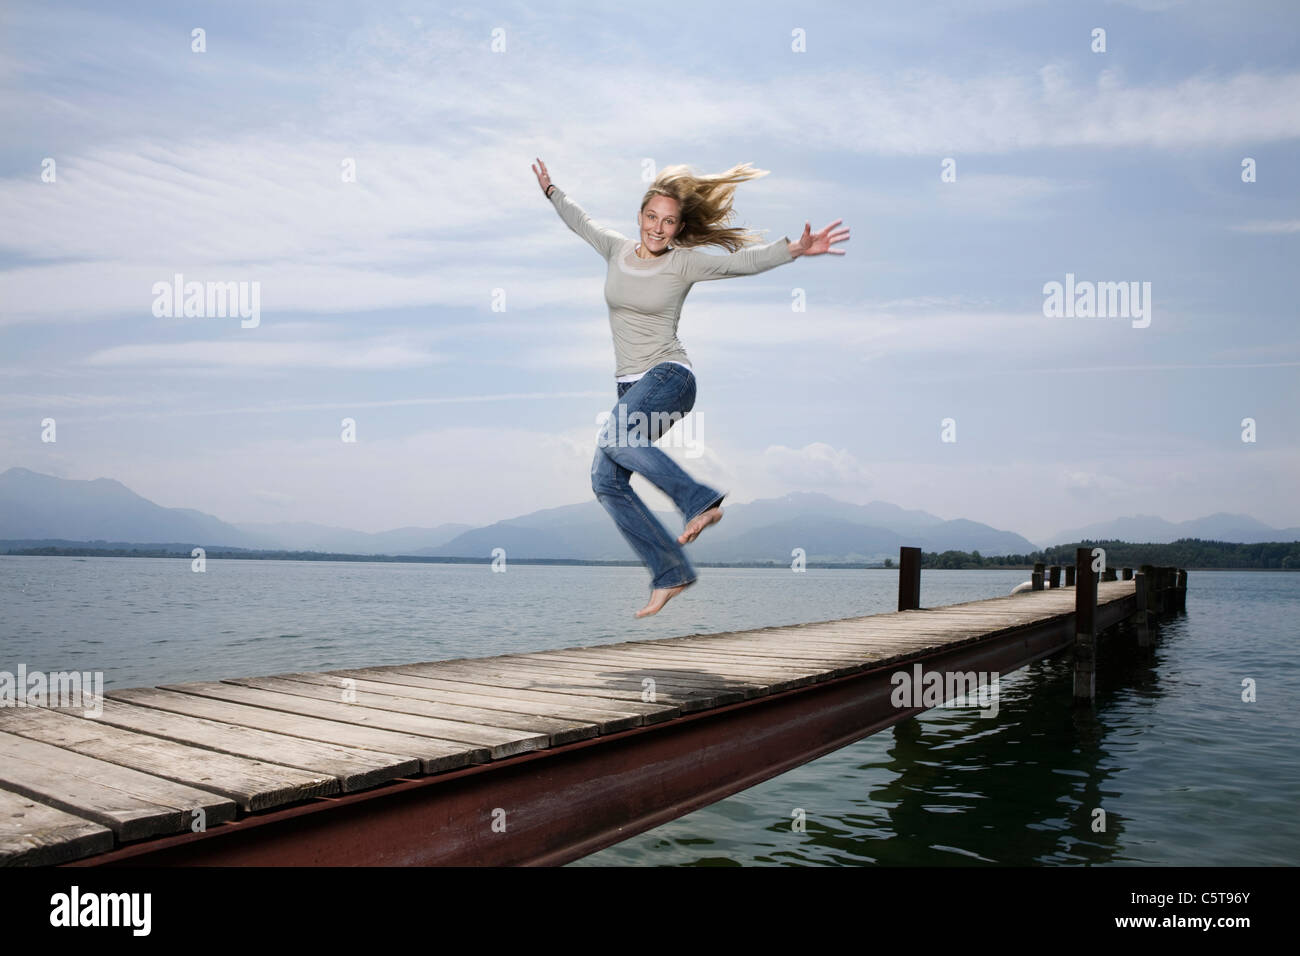 Allemagne, Chiemsee, Woman jumping on jetty Banque D'Images